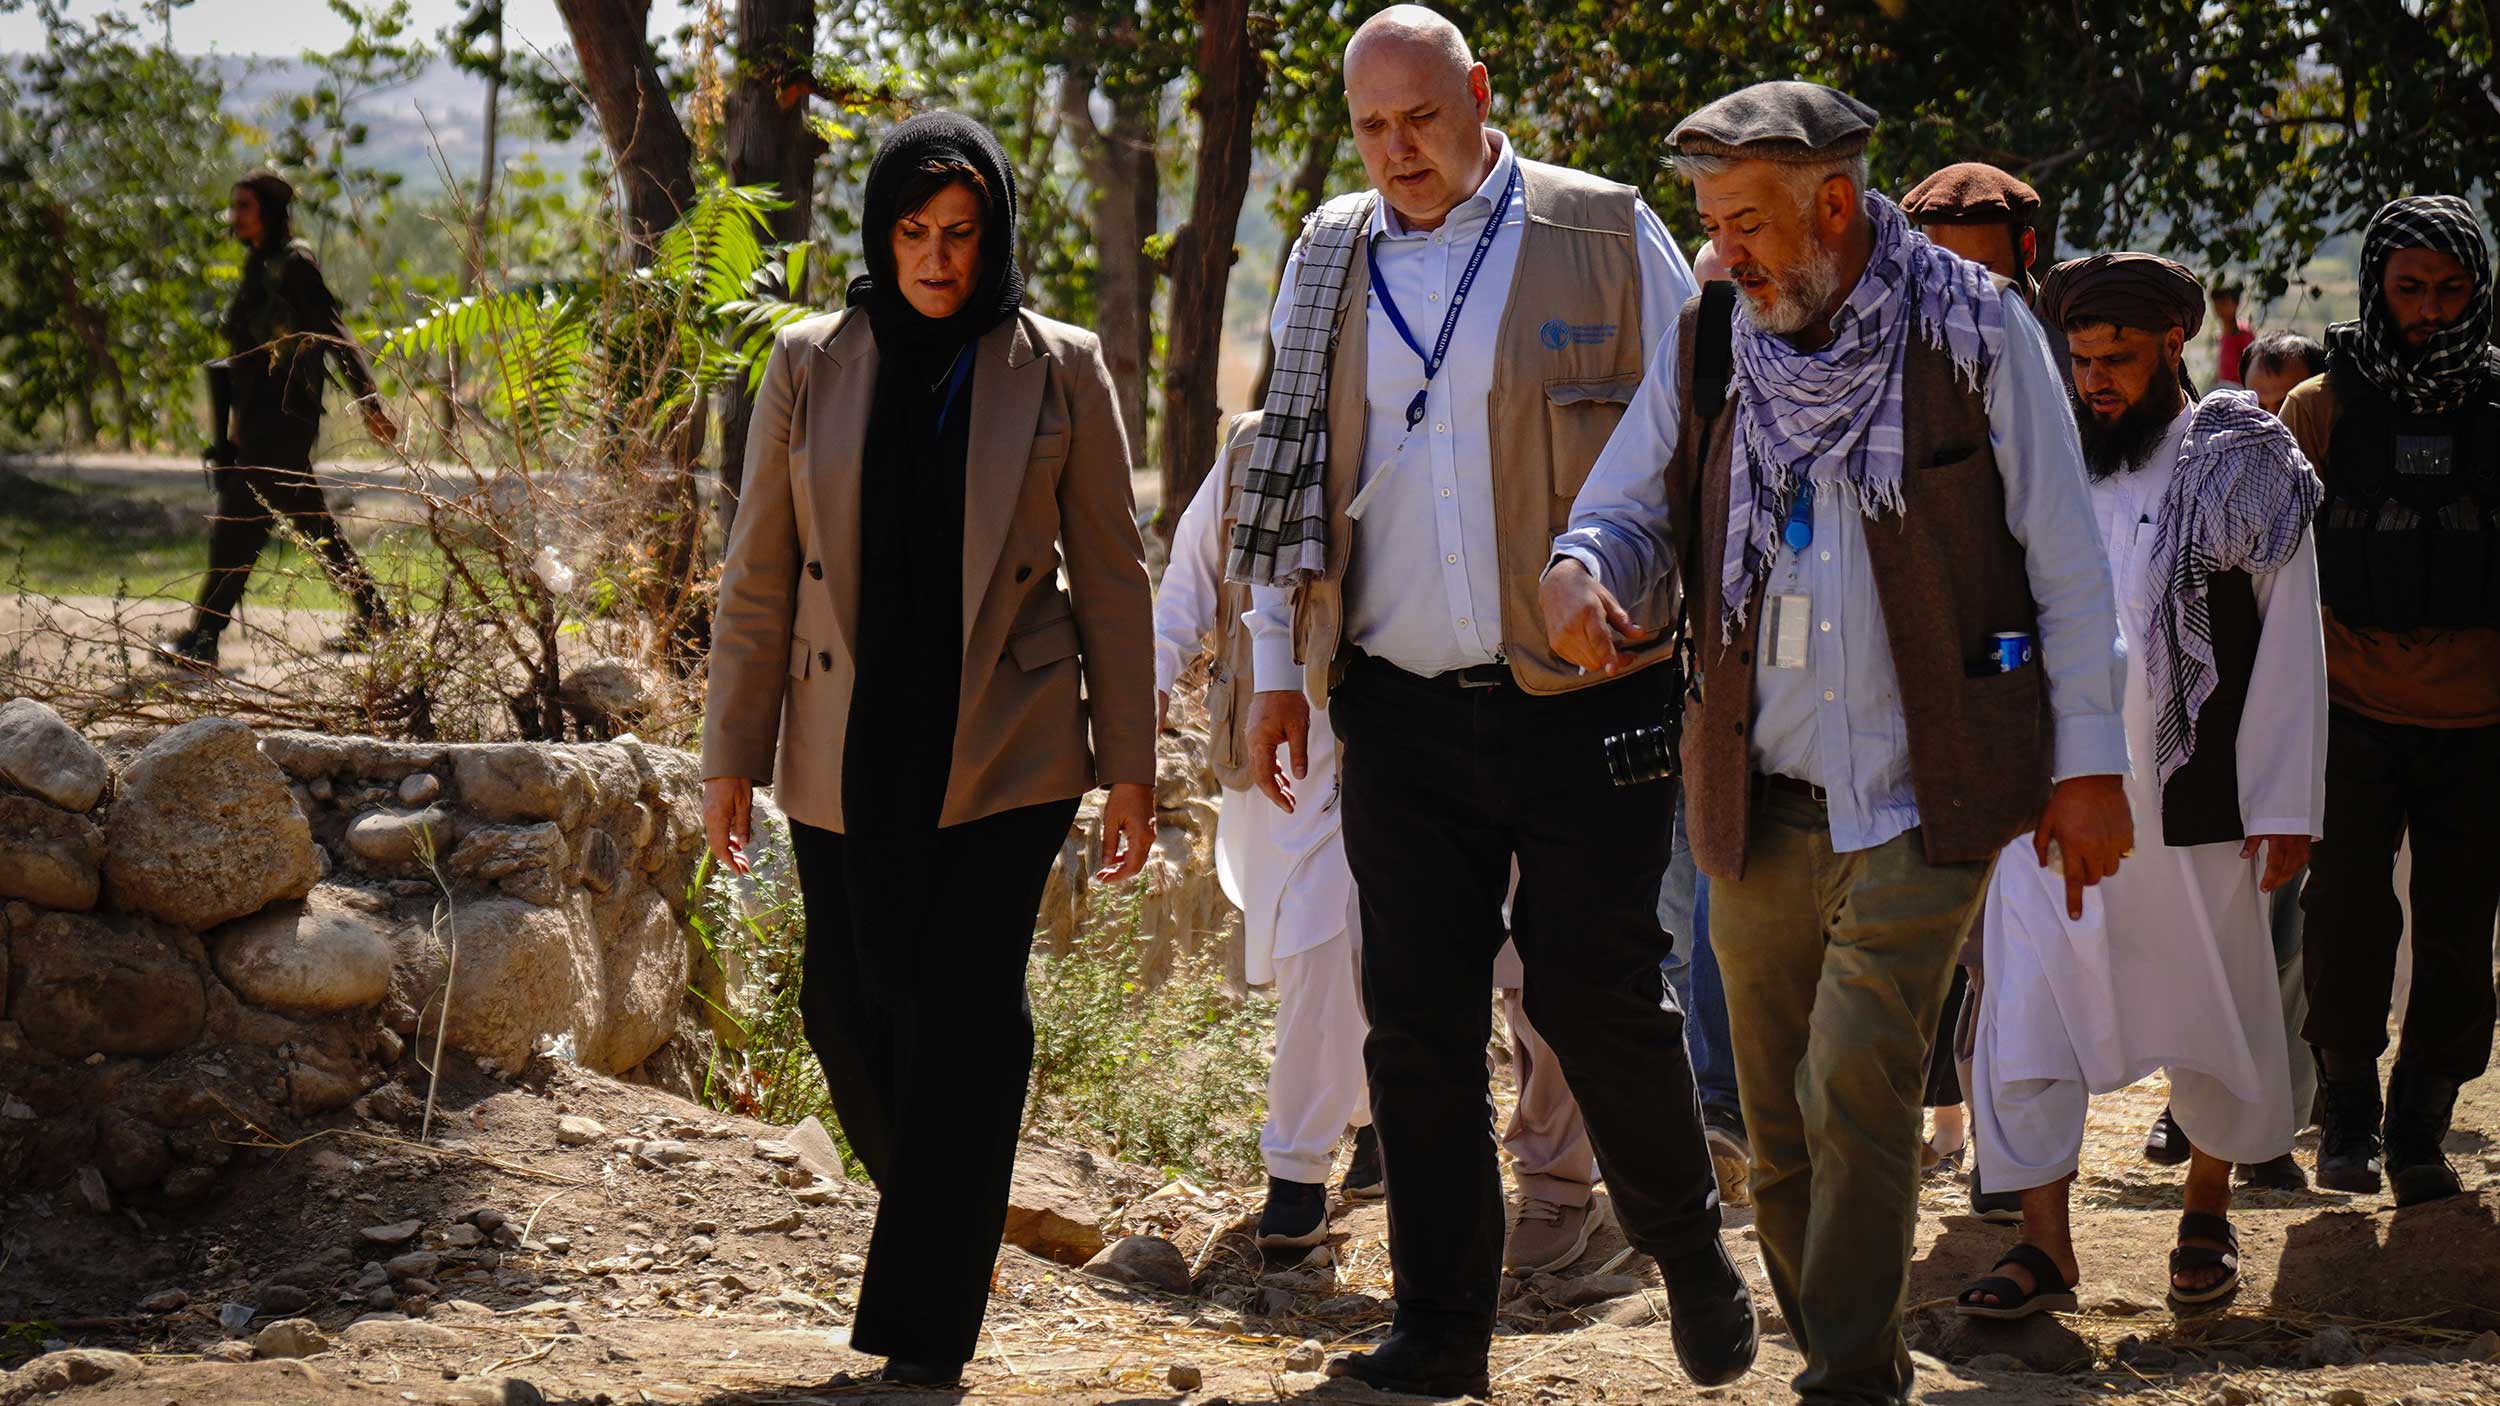 Beth walks with FAO Emergencies Director Rein Paulsen and other men, some in traditional Afghan attire.